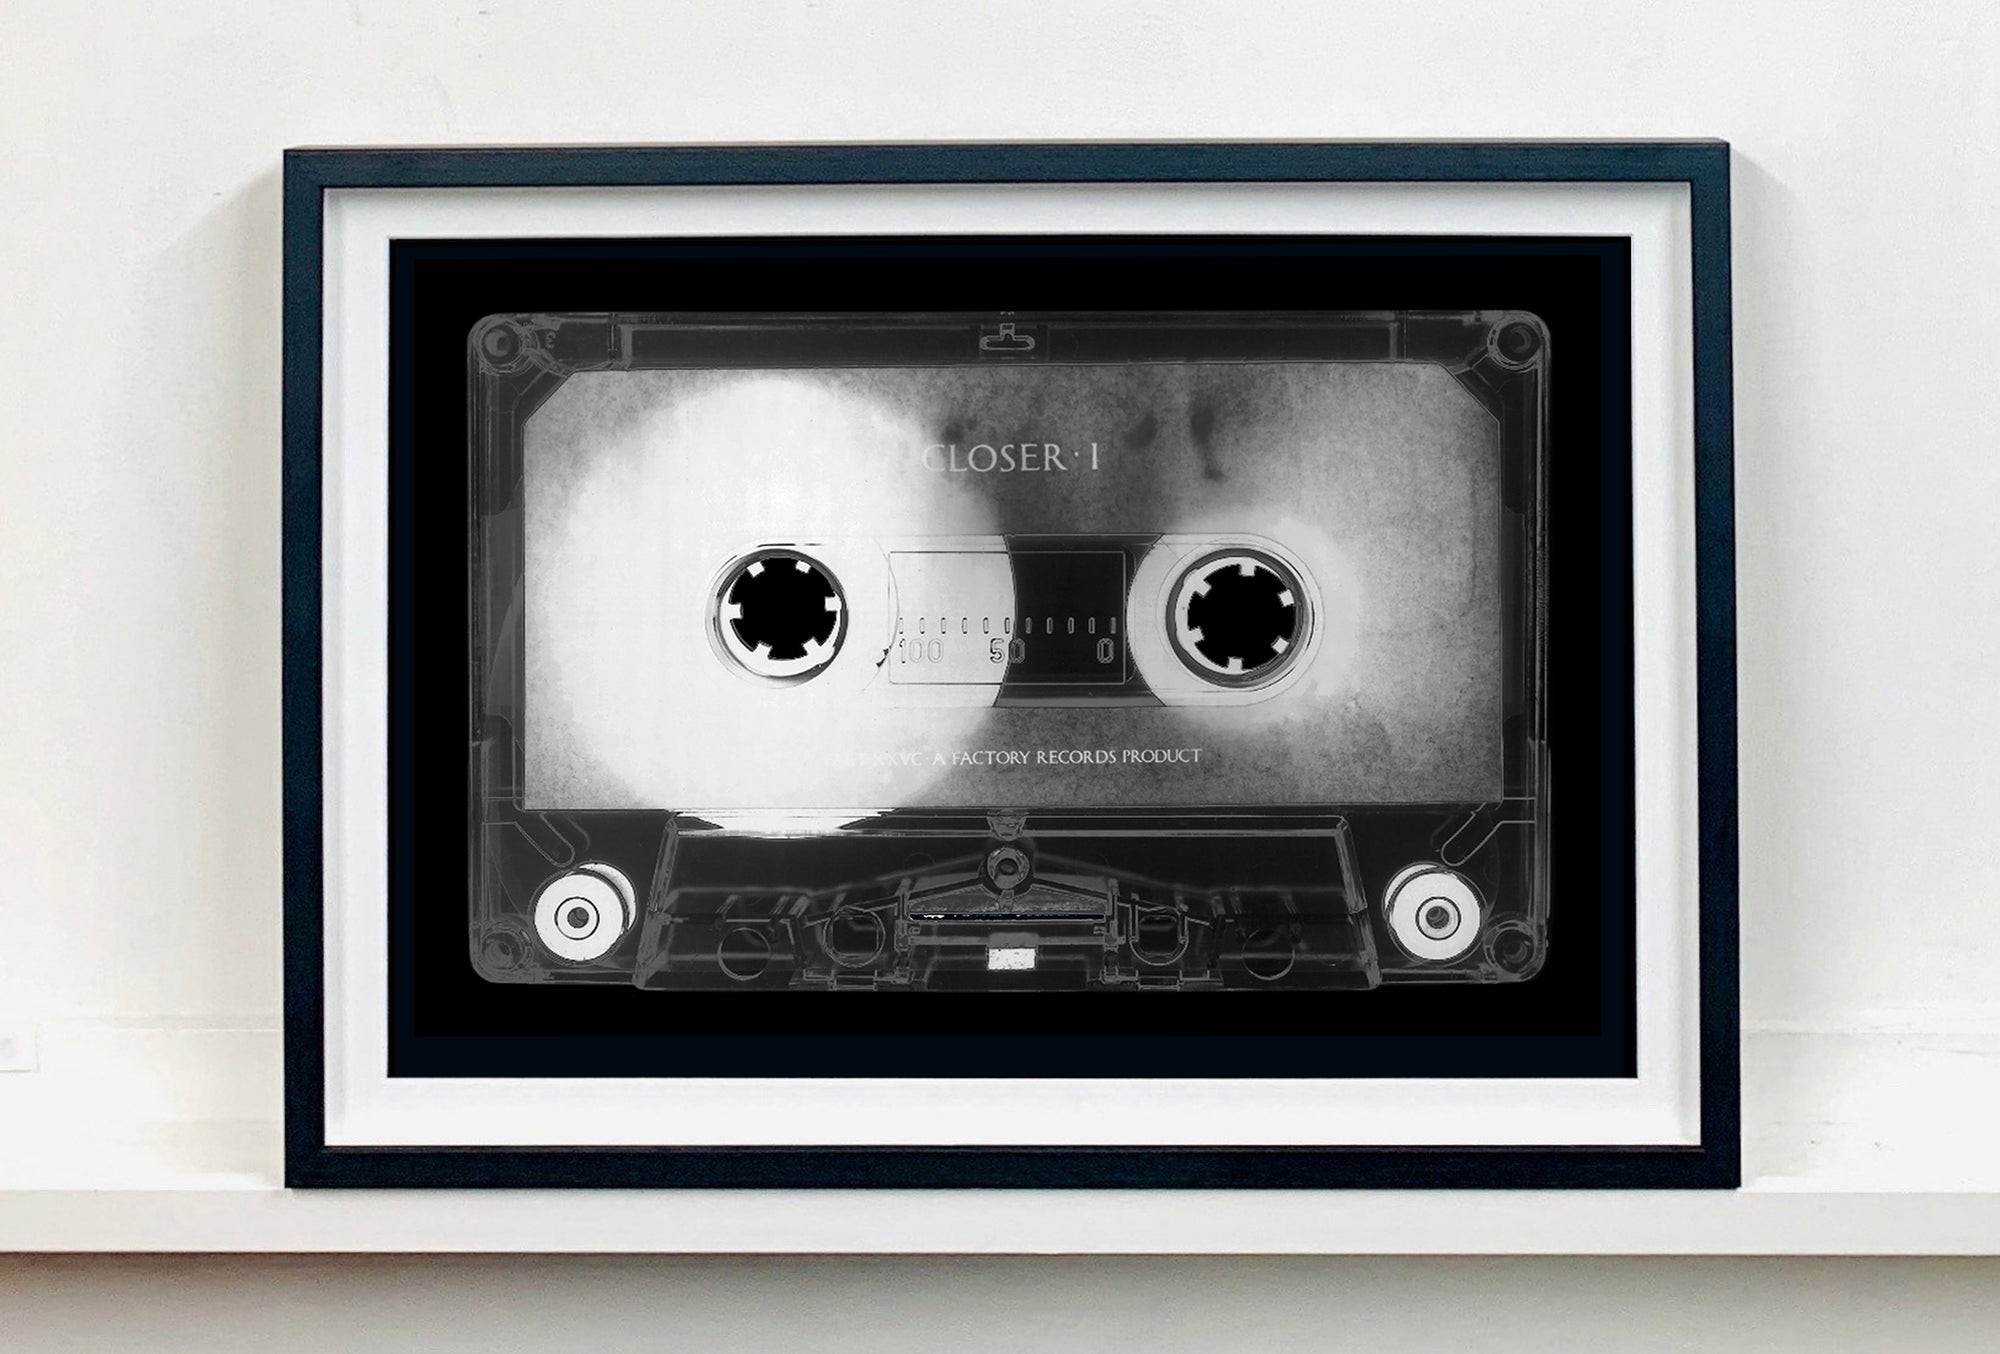 Tape Collection 'Product of the 80's'. The Heidler & Heeps collaborations are creative representations of Natasha Heidler and Richard Heeps’ personal past, and their personalities. Tapes are significant in both their lives and the work here is made from their own collections. Their unique process makes these artworks not inanimate objects, rather they have depth, texture, grit, and they even appear to move.